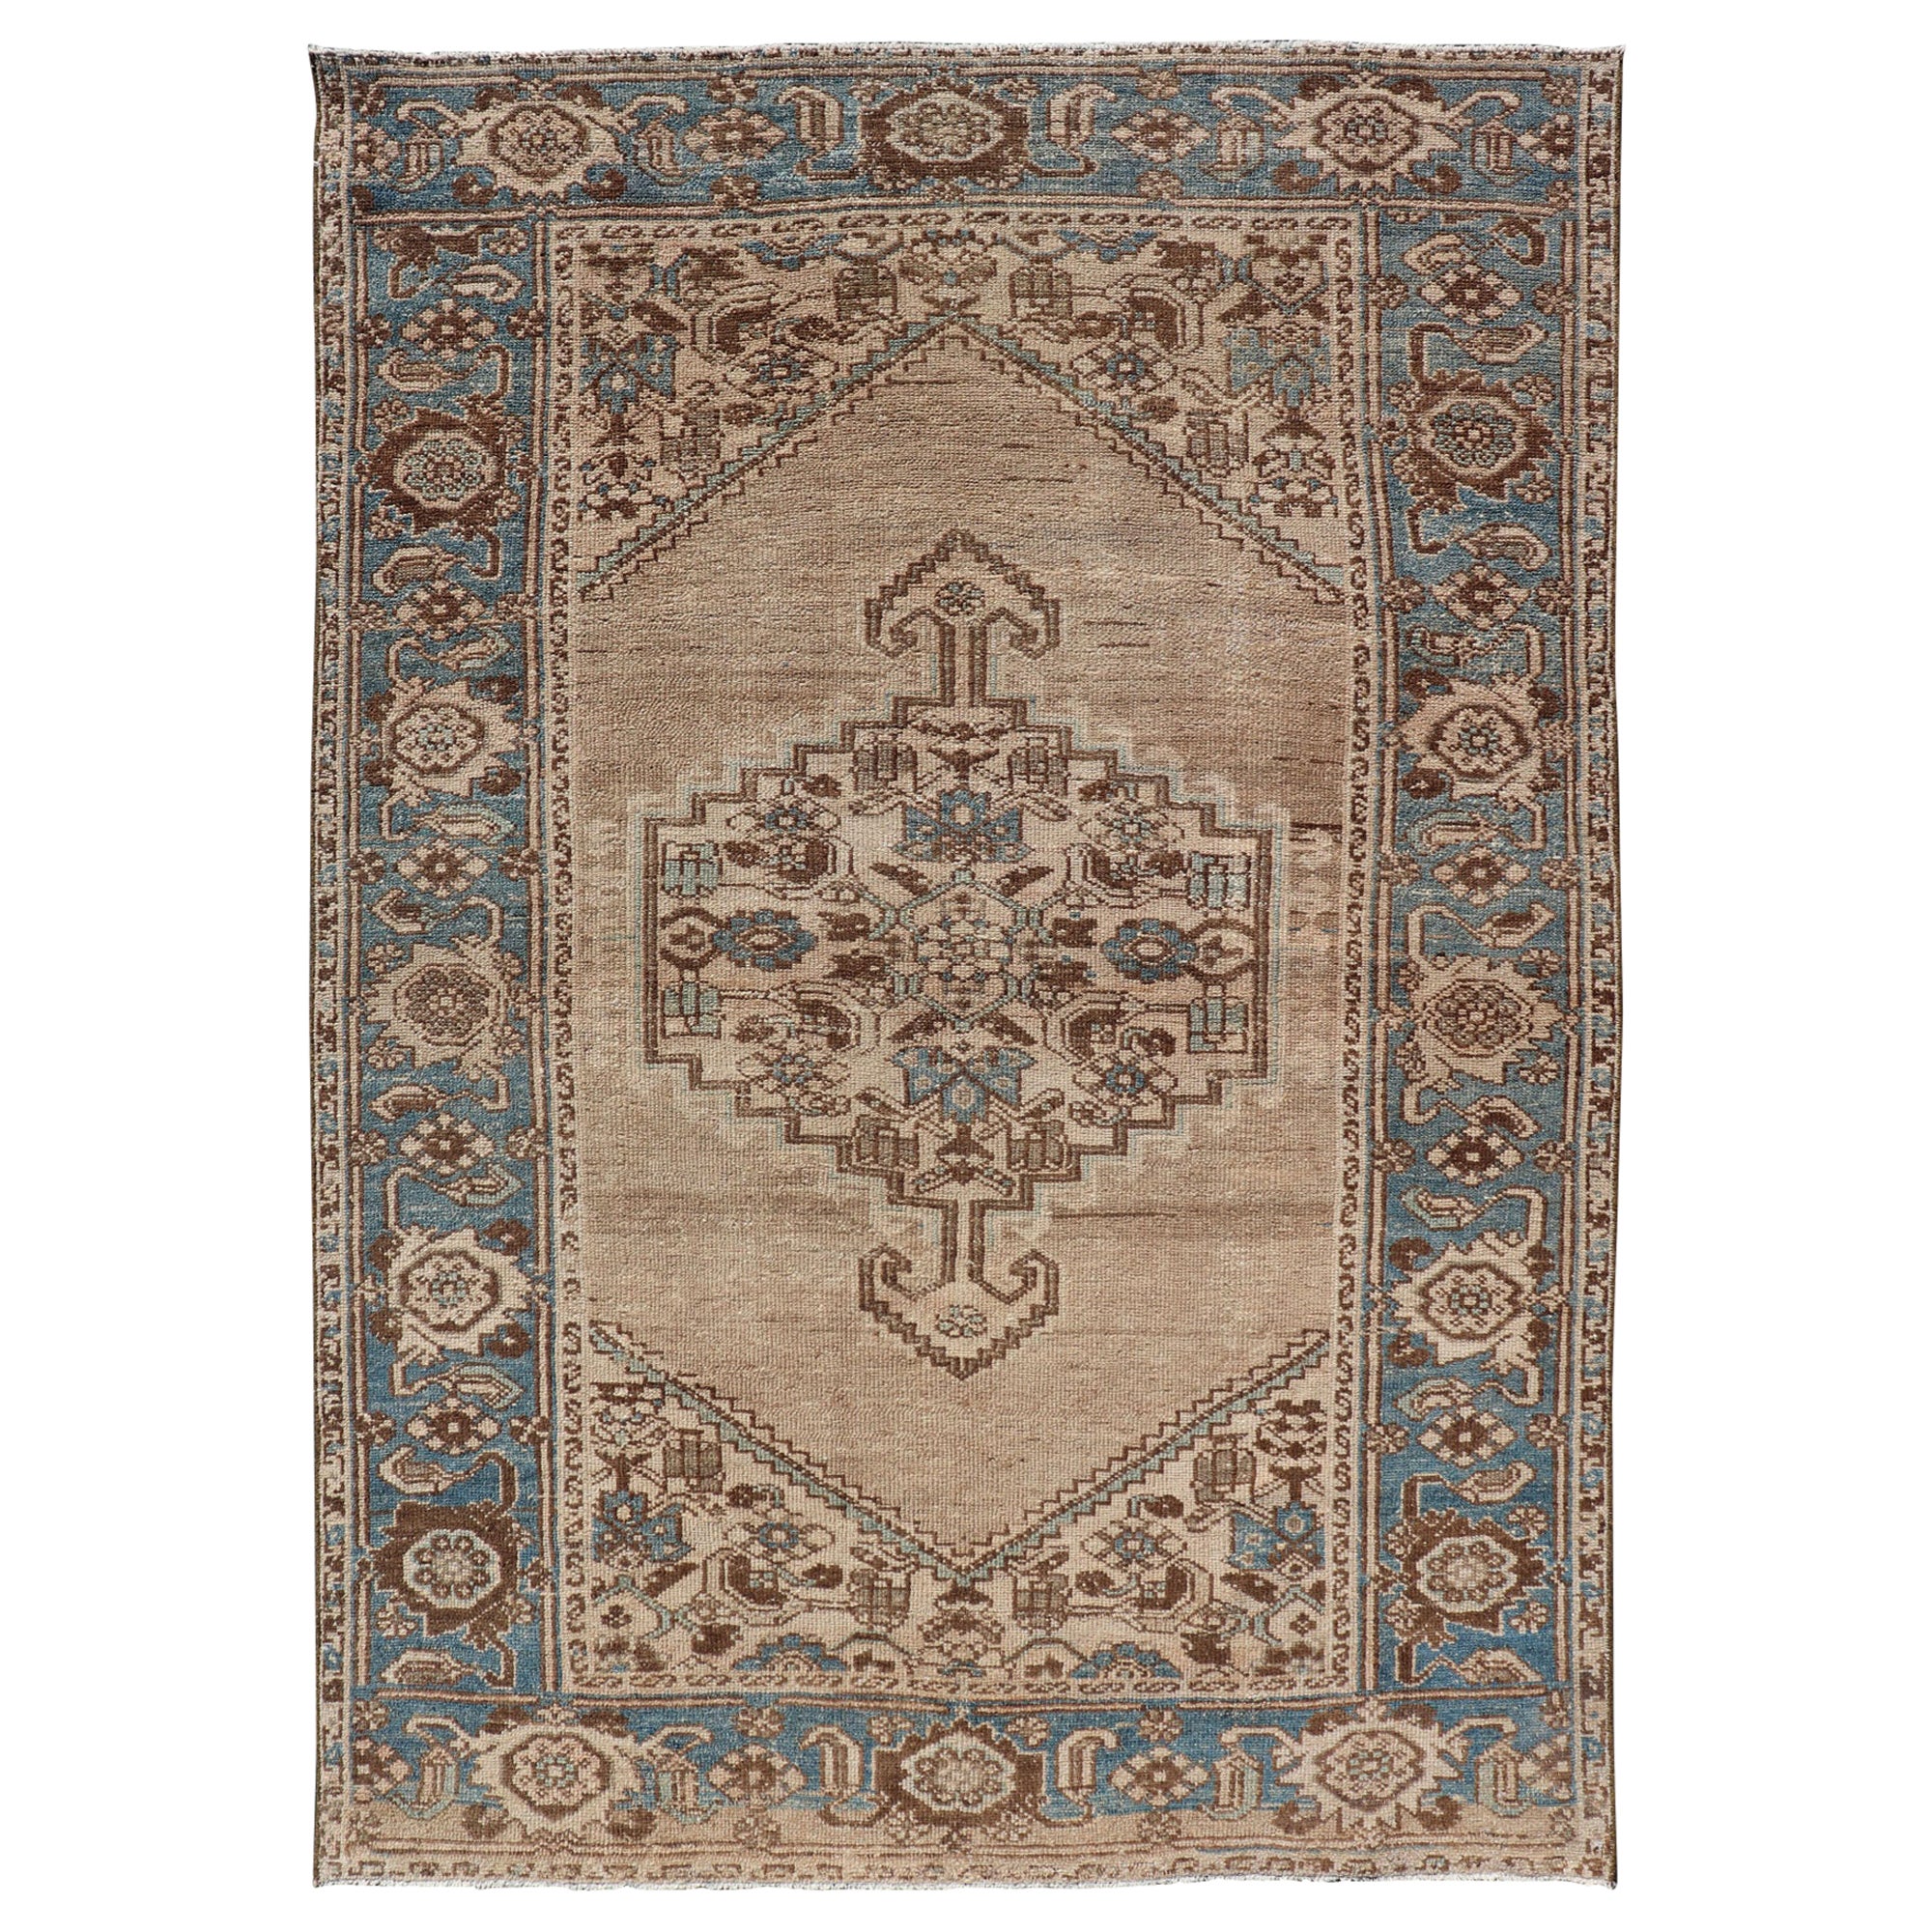 Antique Persian Hamadan Rug with Medallion Design in Tan, Light Blue & Brown For Sale